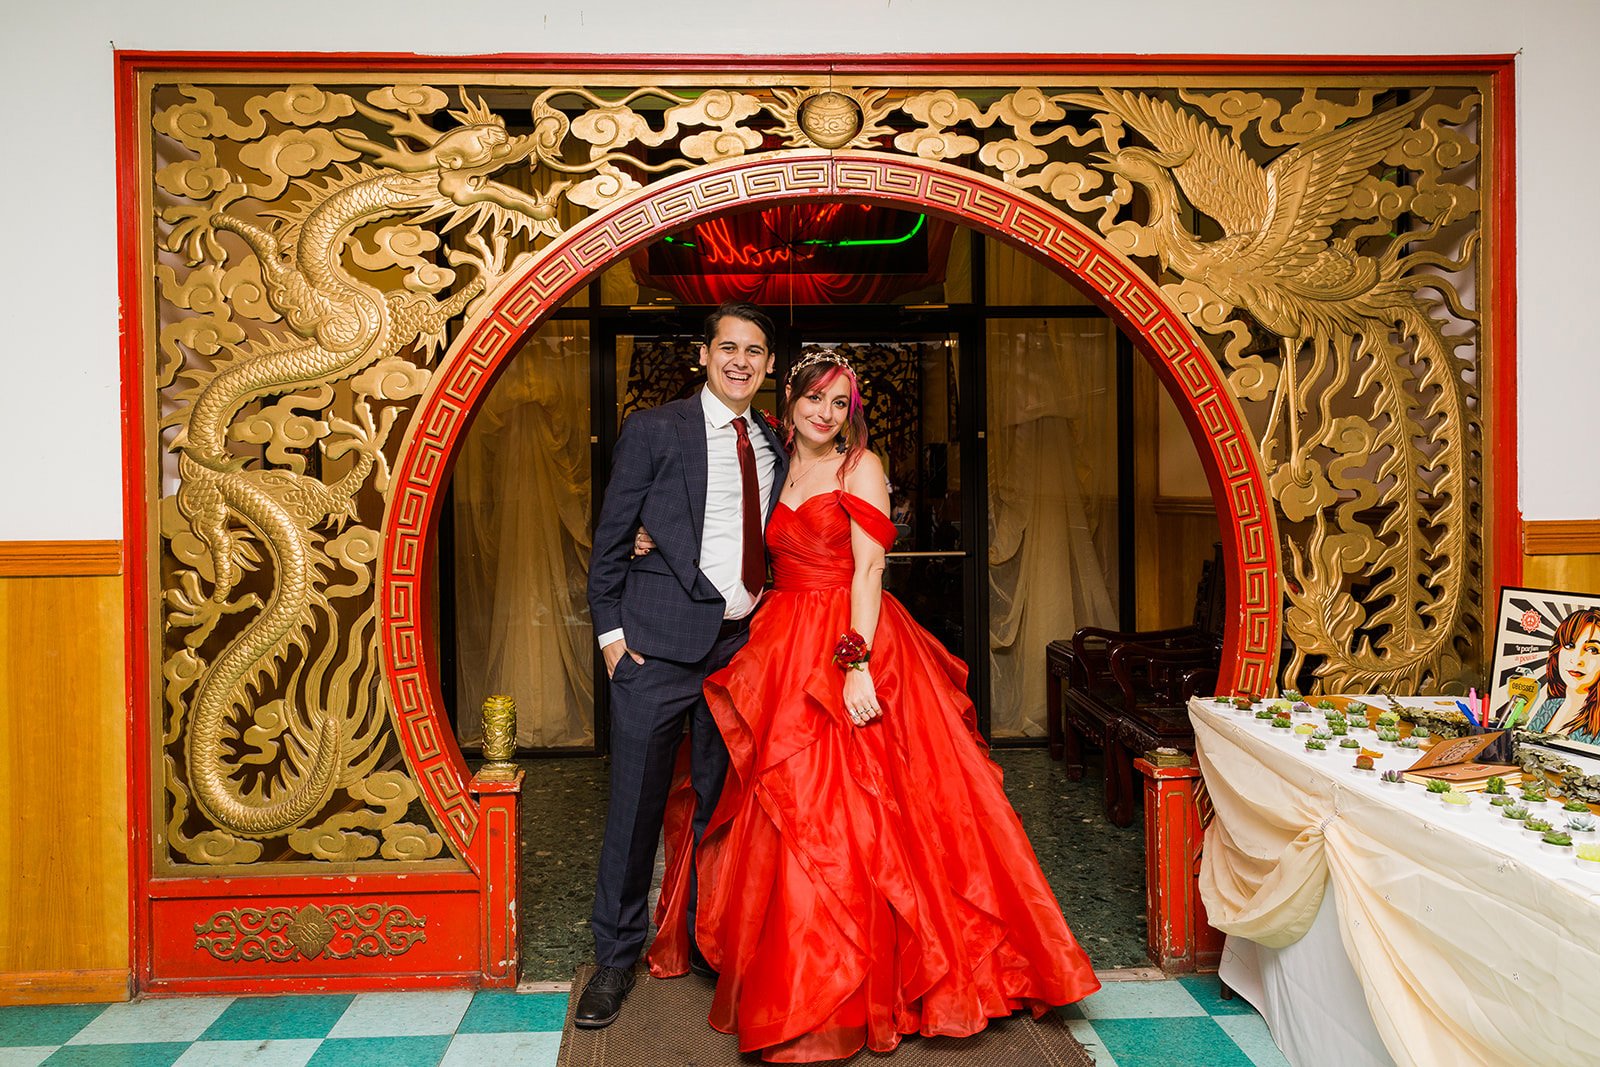  Bride in nontraditional red wedding dress poses with groom under decorative arch at dim sum restaurant Furama in Chicago 